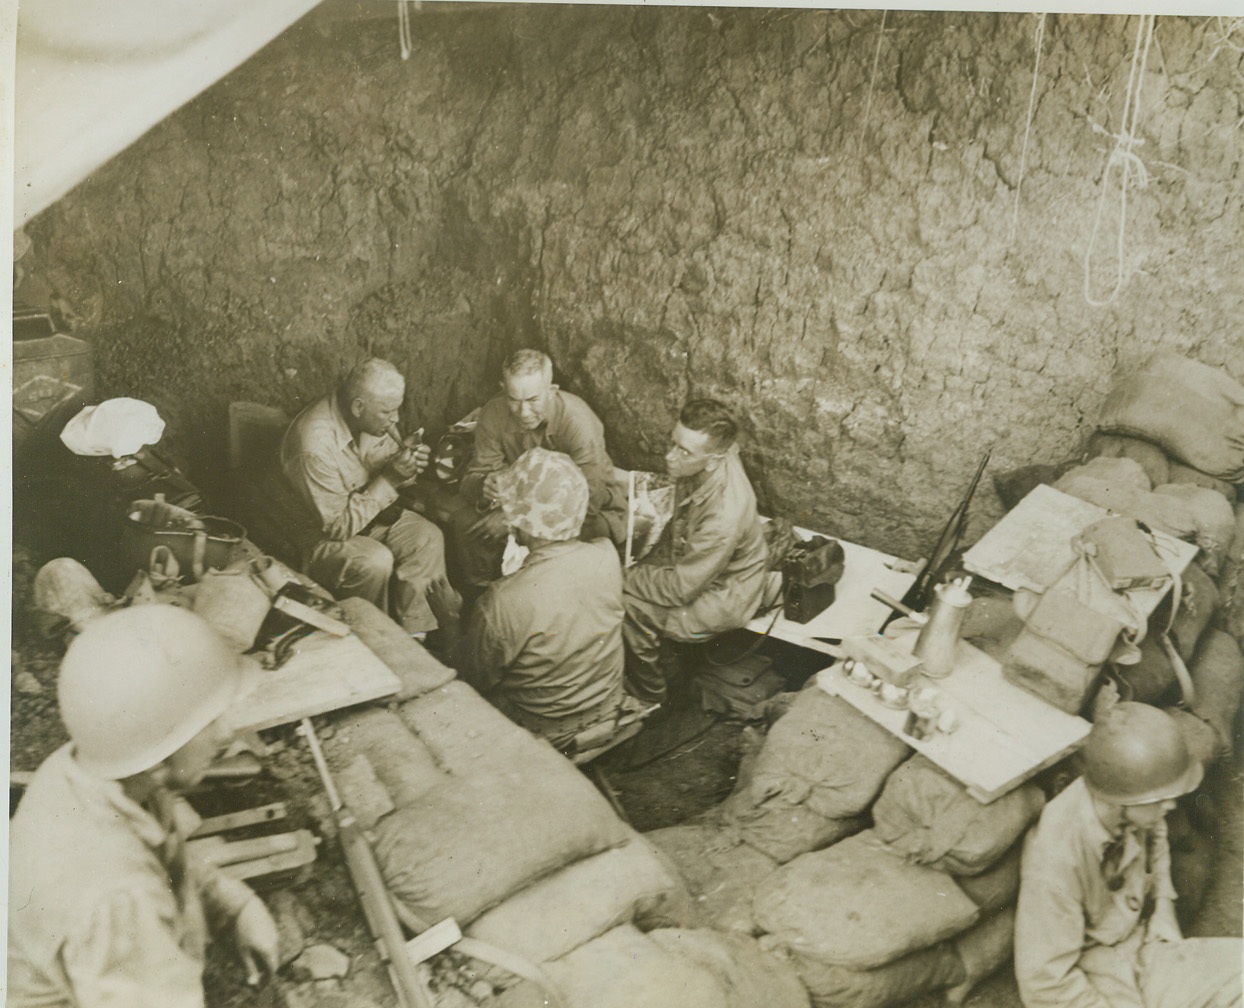 Underground Guam Command Post, 8/22/1944. GUAM -- In this super foxhole turned into a command post on Guam, Maj. Gen. Roy S. Geiger (left), commander of Third Marine Amphibious Corps, confers with Maj. Gen. Allen H. Turnage, USMC. Sand bags and alert sentries furnish additional protection against possible Jap interruption of this battlefront strategy huddle.  Credit (Marine Corps Photo from ACME);